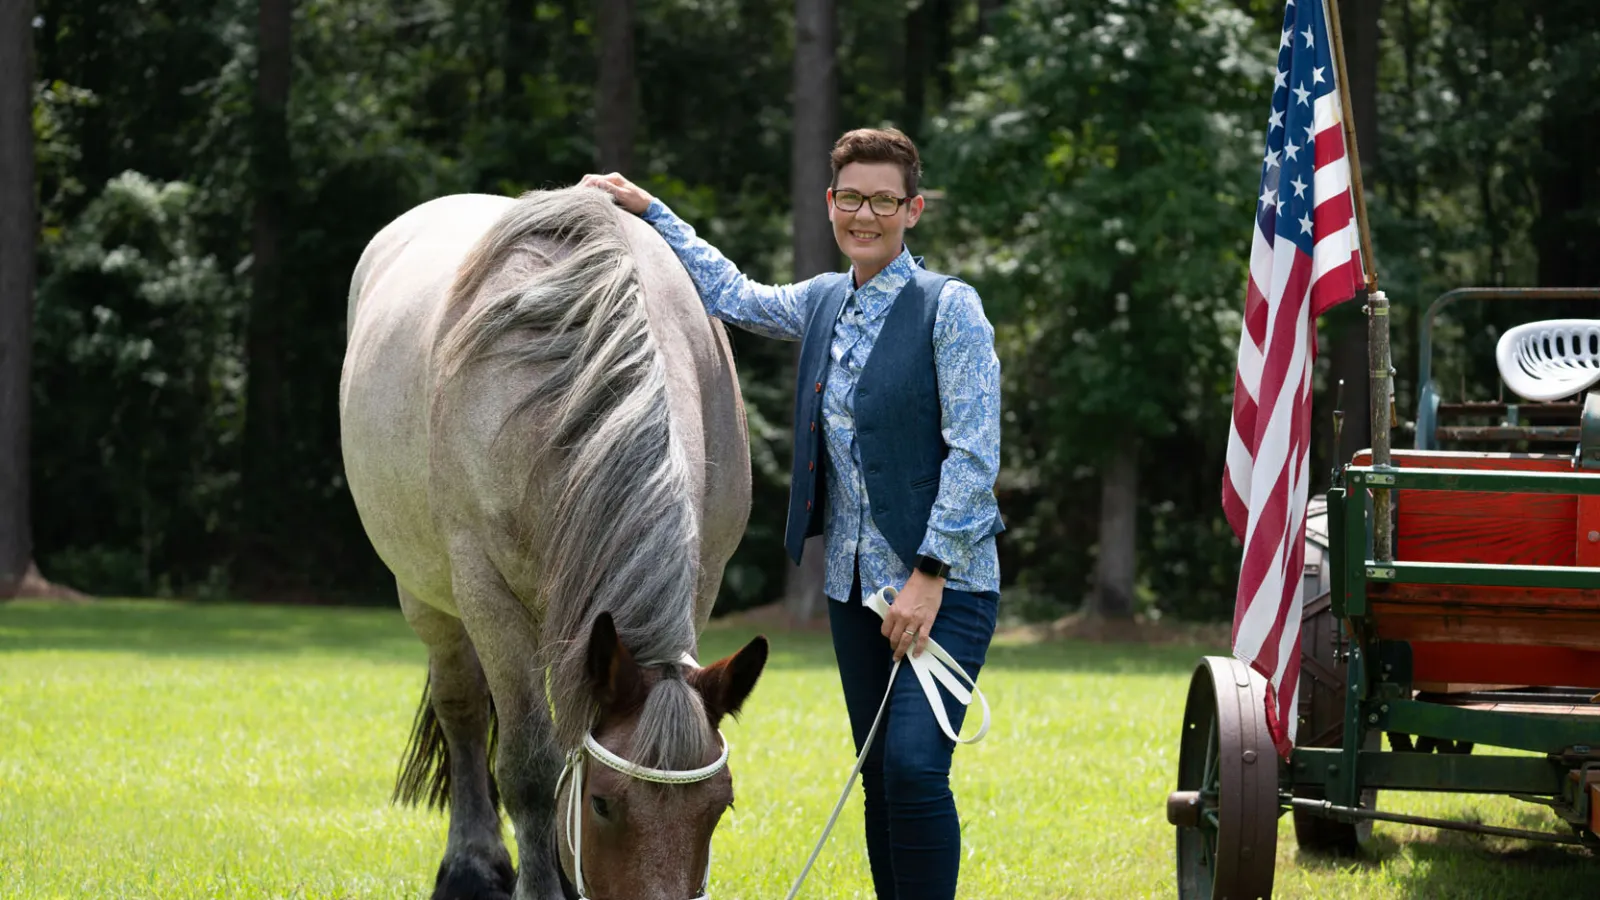 Stacy Pearsall and one of her horses smiling next to the American flag.